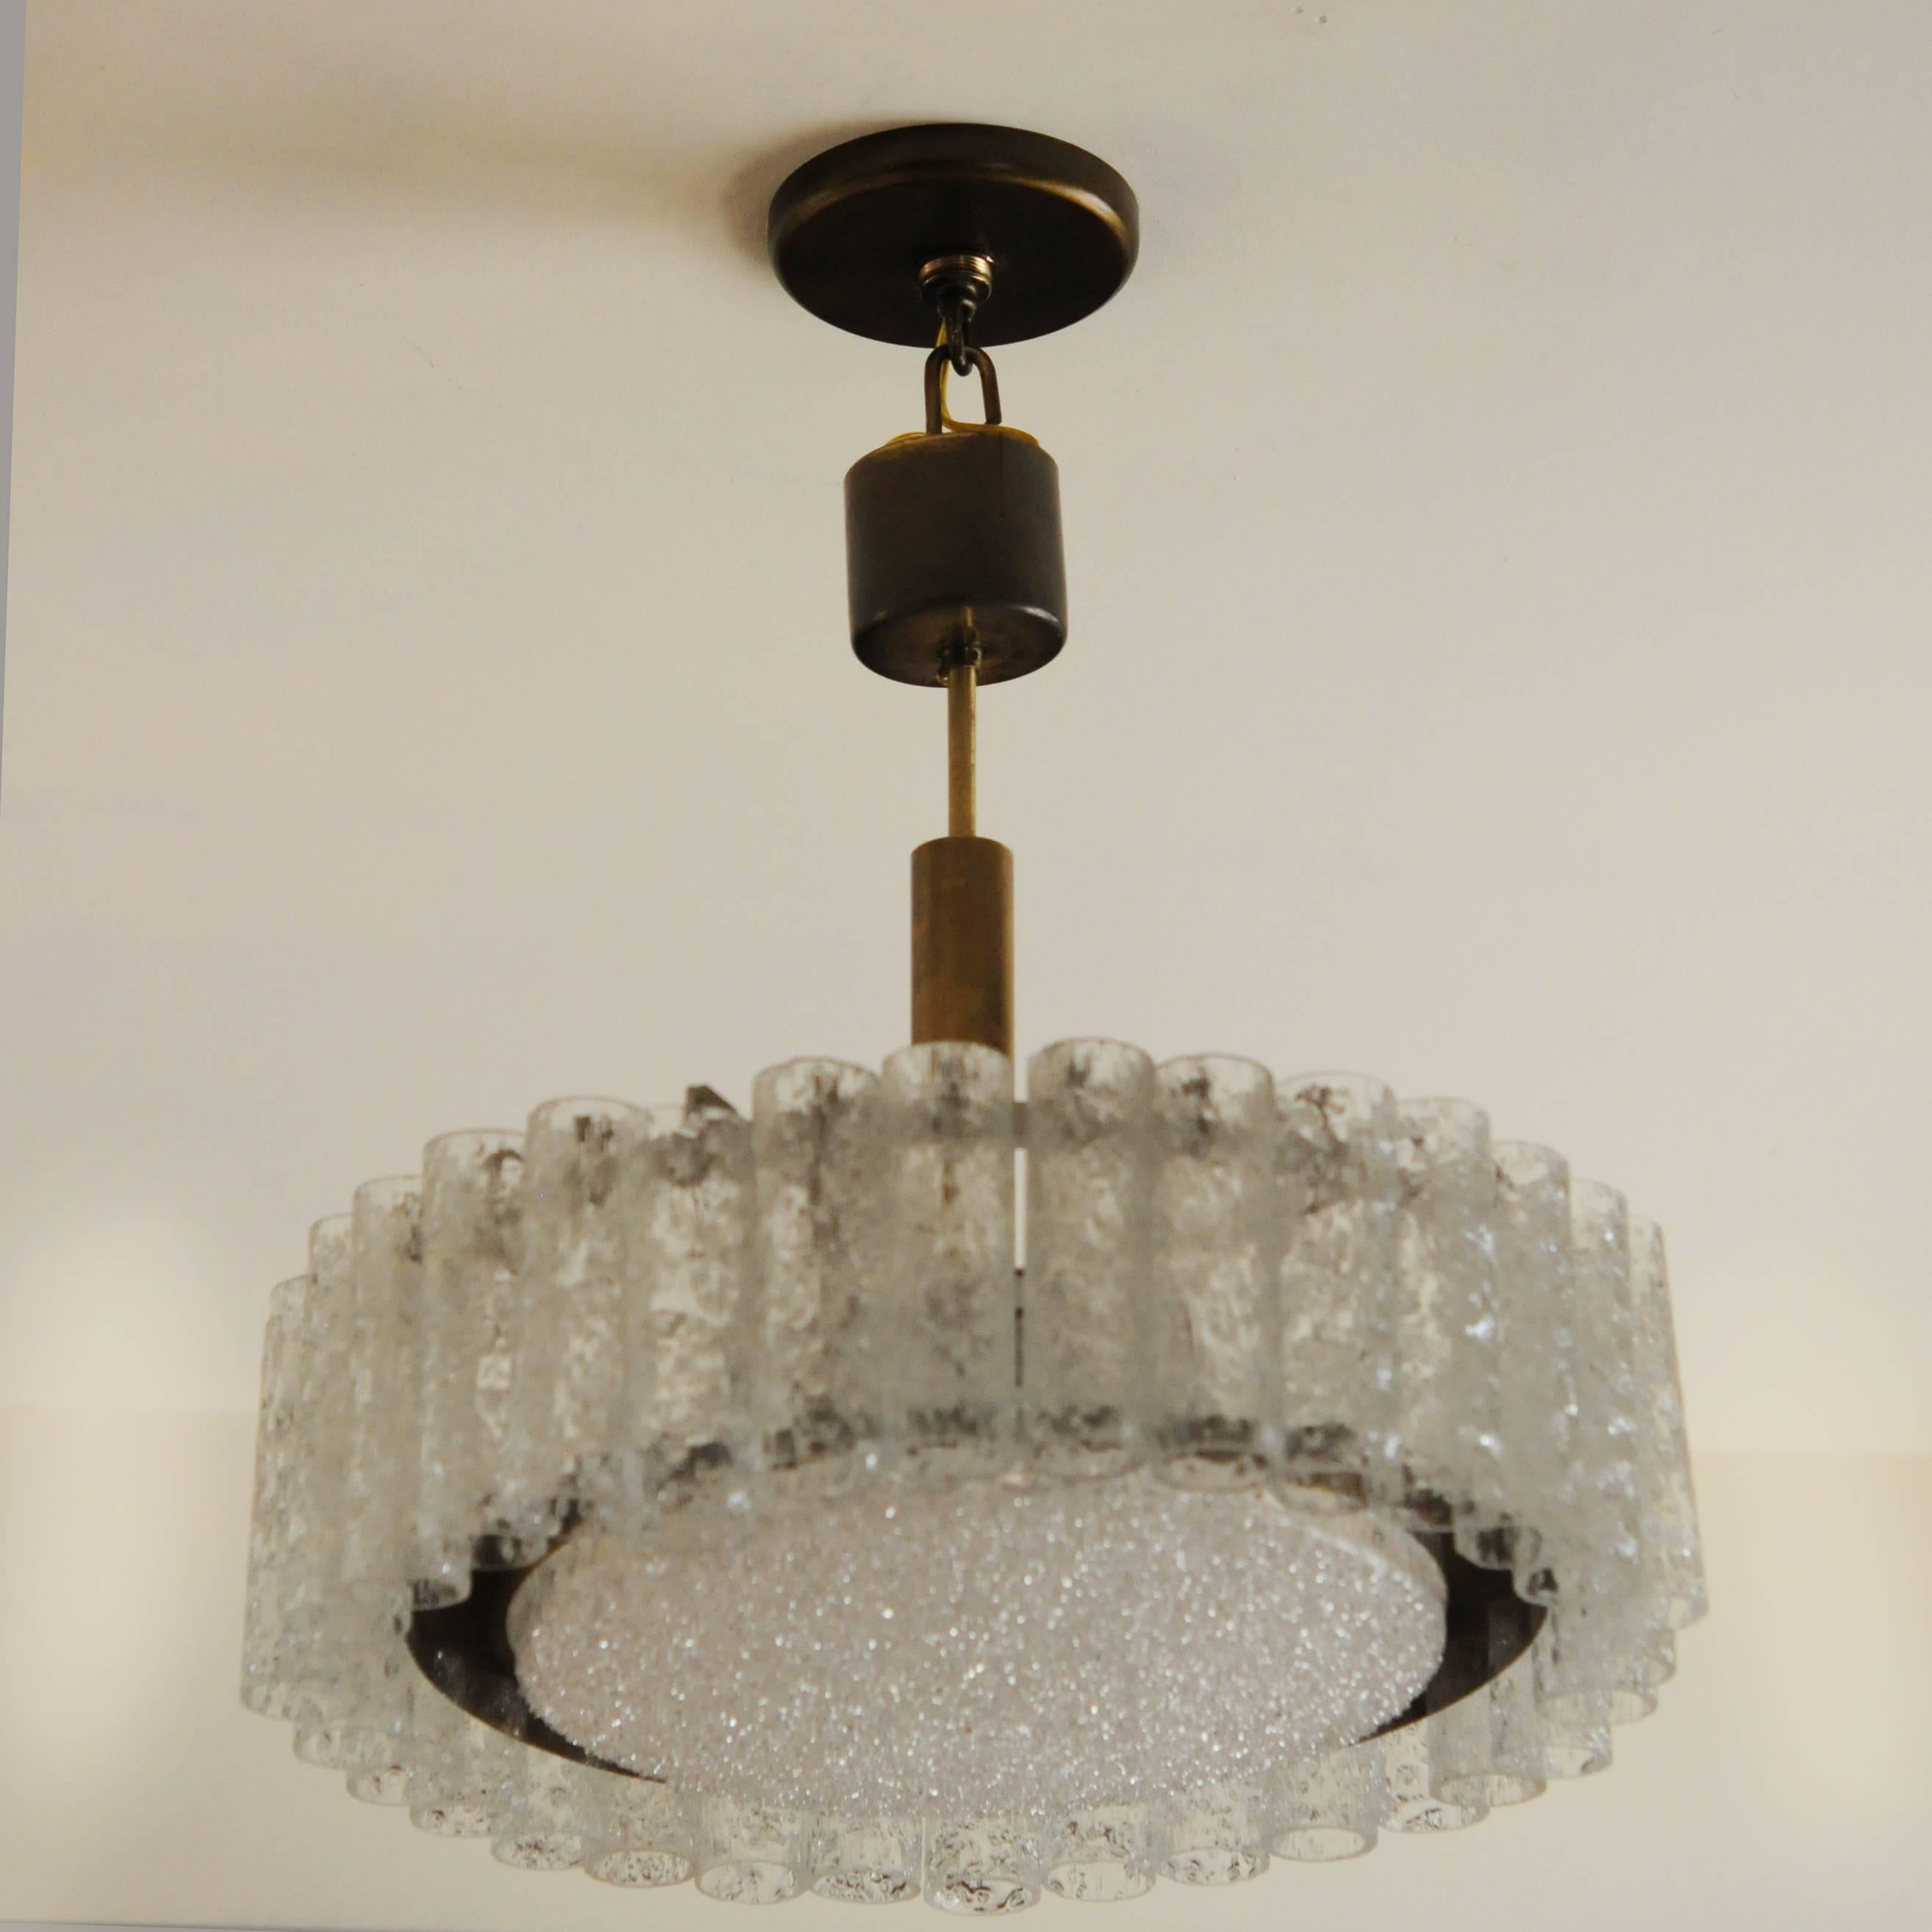 Murano glass chandelier with glass diffuser by Doria. Frame and canopy are brass.